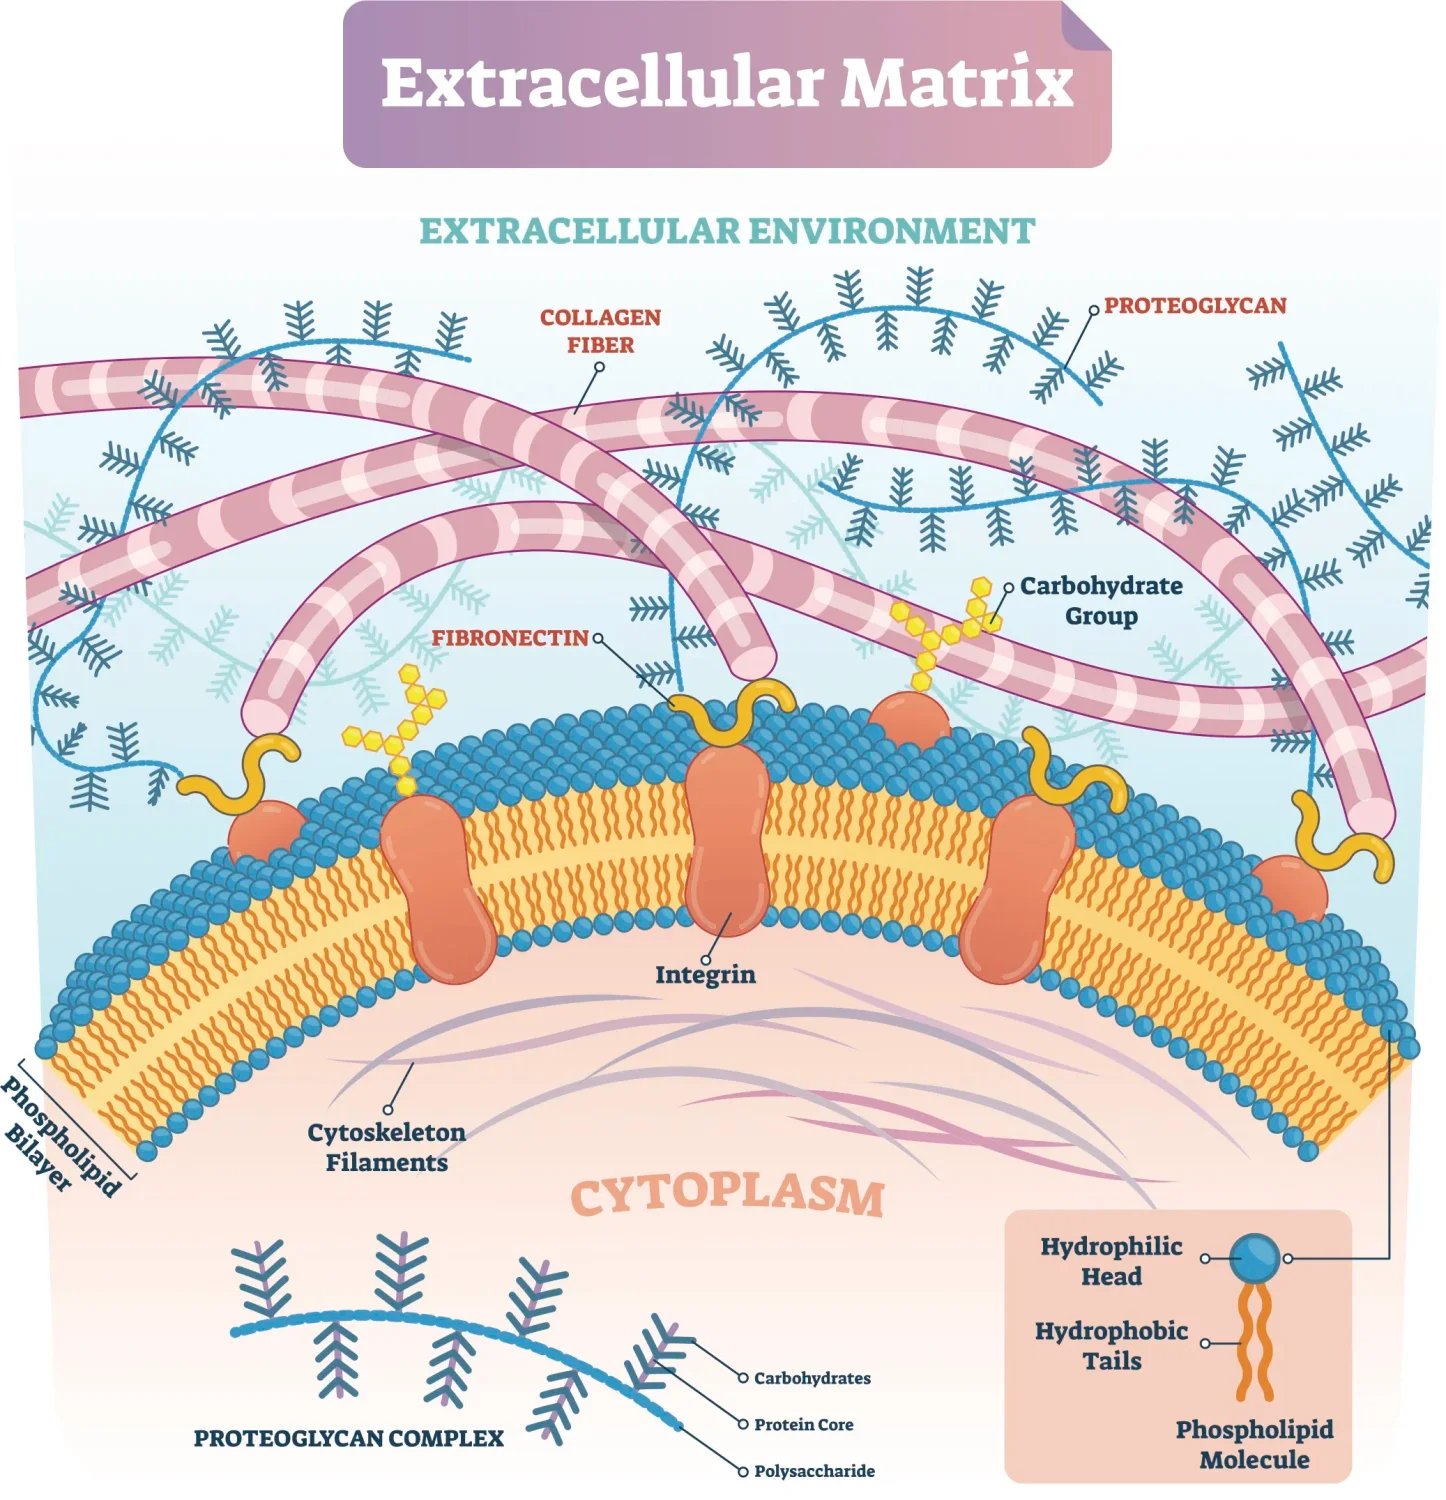 Graphic Showing the Extracellular Matrix